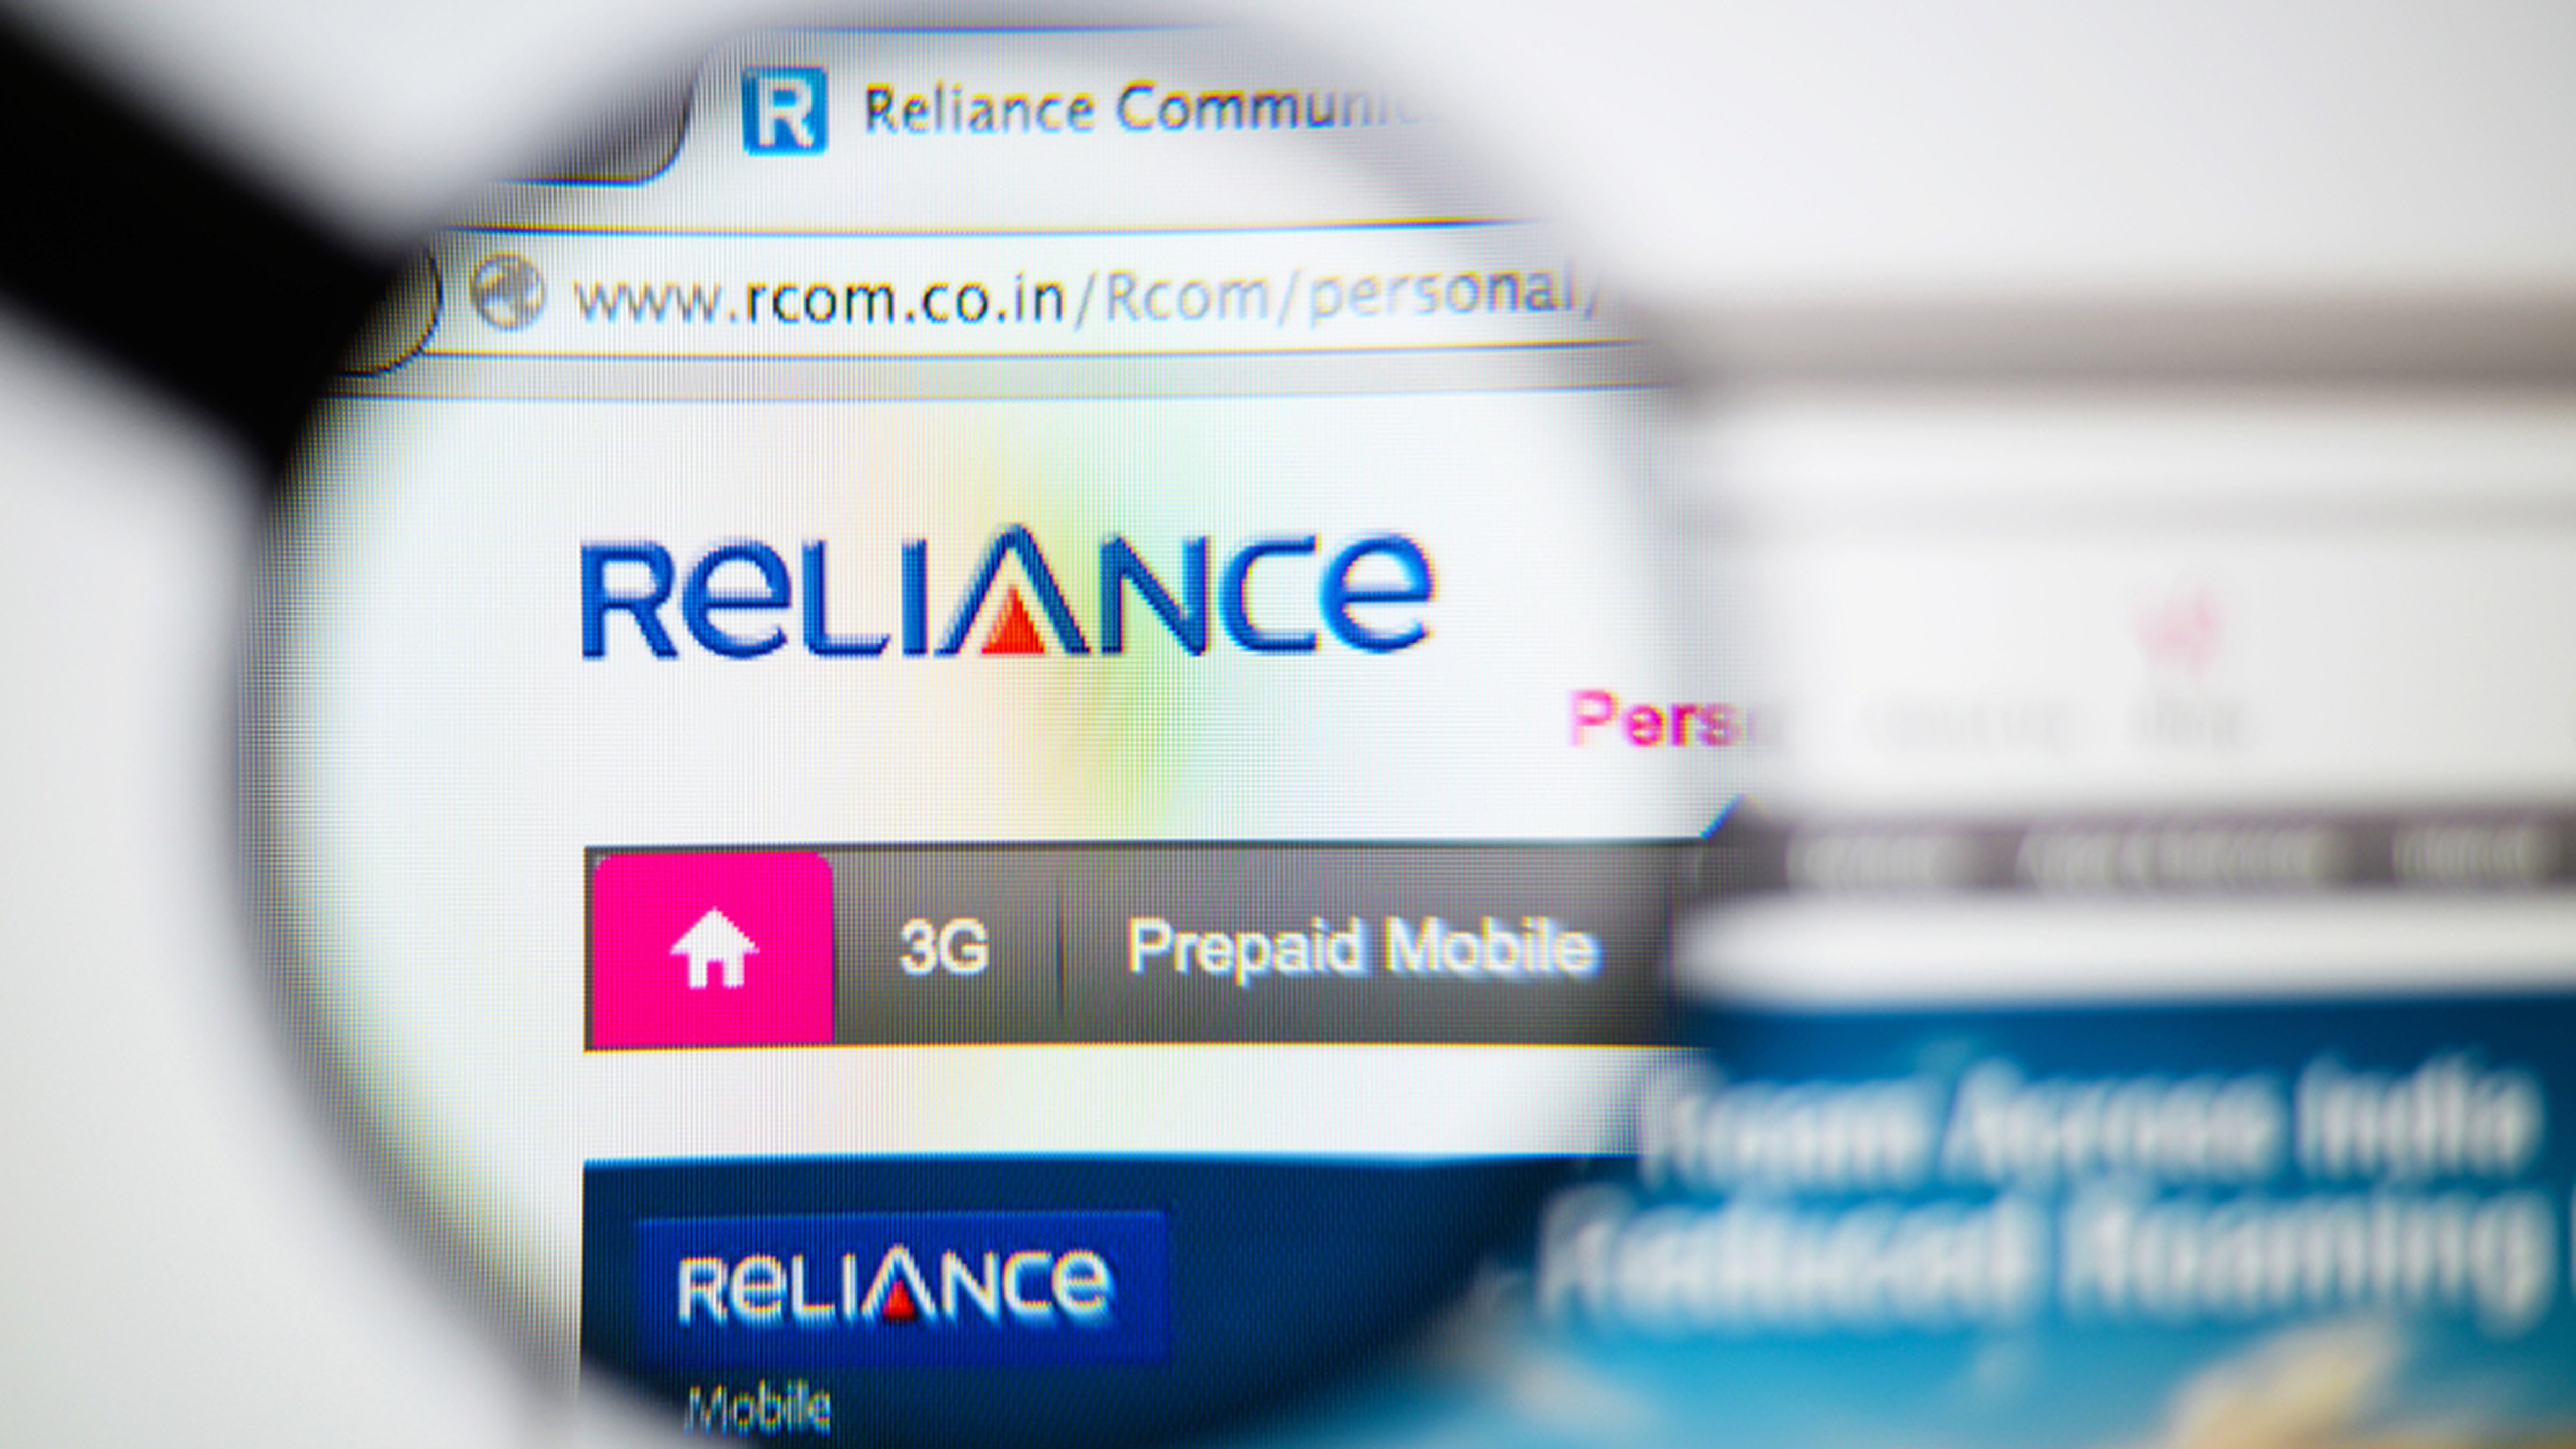 R-Com has offered the DoT a corporate guarantee of Rs 1,400 crore issued by Reliance Realty Limited (RRL) and an undertaking from RRL not to alienate property for a value of Rs 1,400 crore for approving the sale of its spectrum to Jio